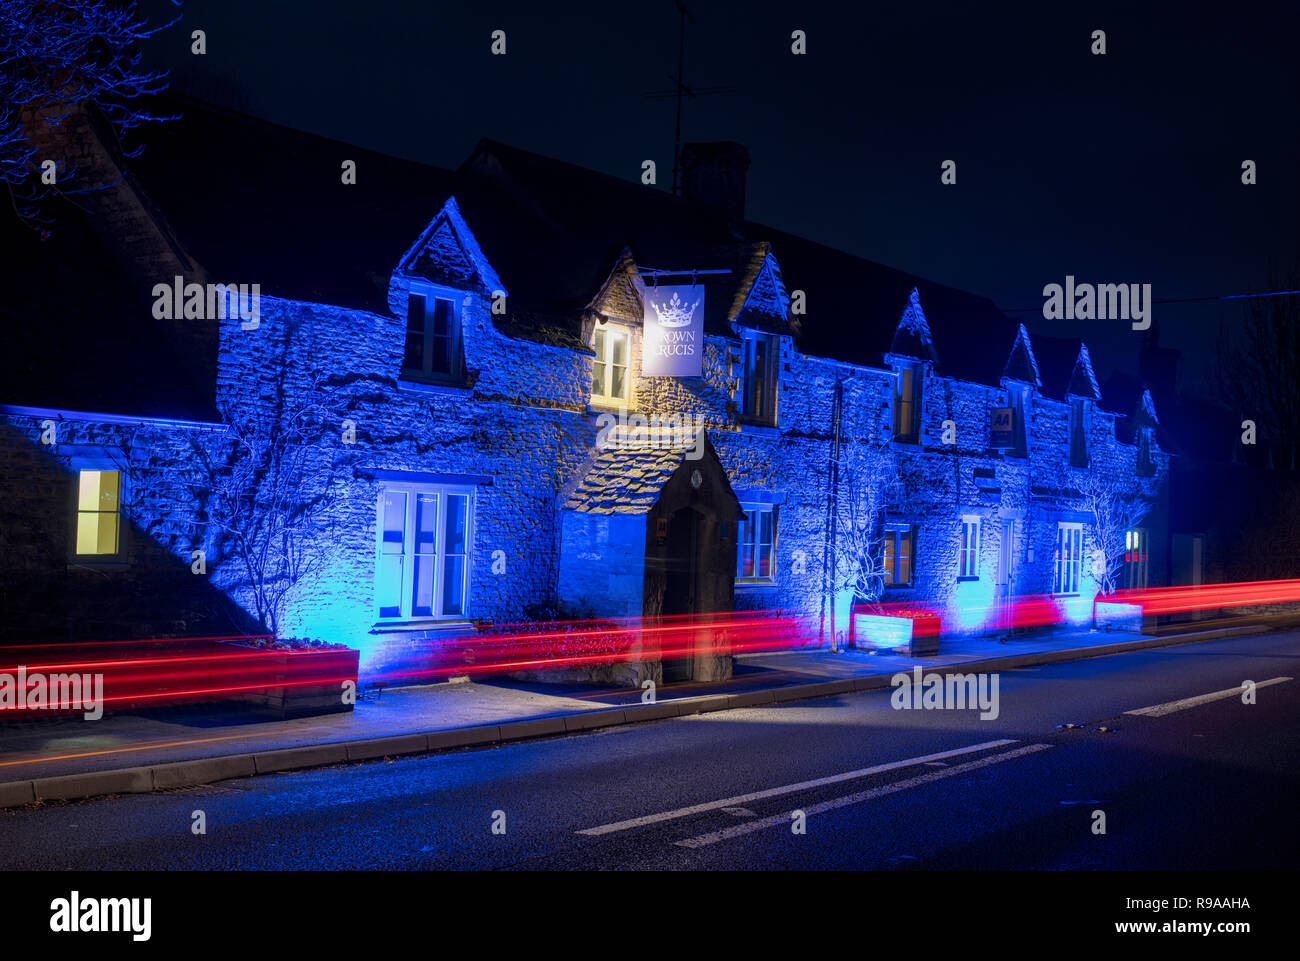 The Crown of Crucis country inn and hotel at lit by blue lights night. Ampney Crucis, Cotswolds, Cirencester, Gloucestershire, England Stock Photo